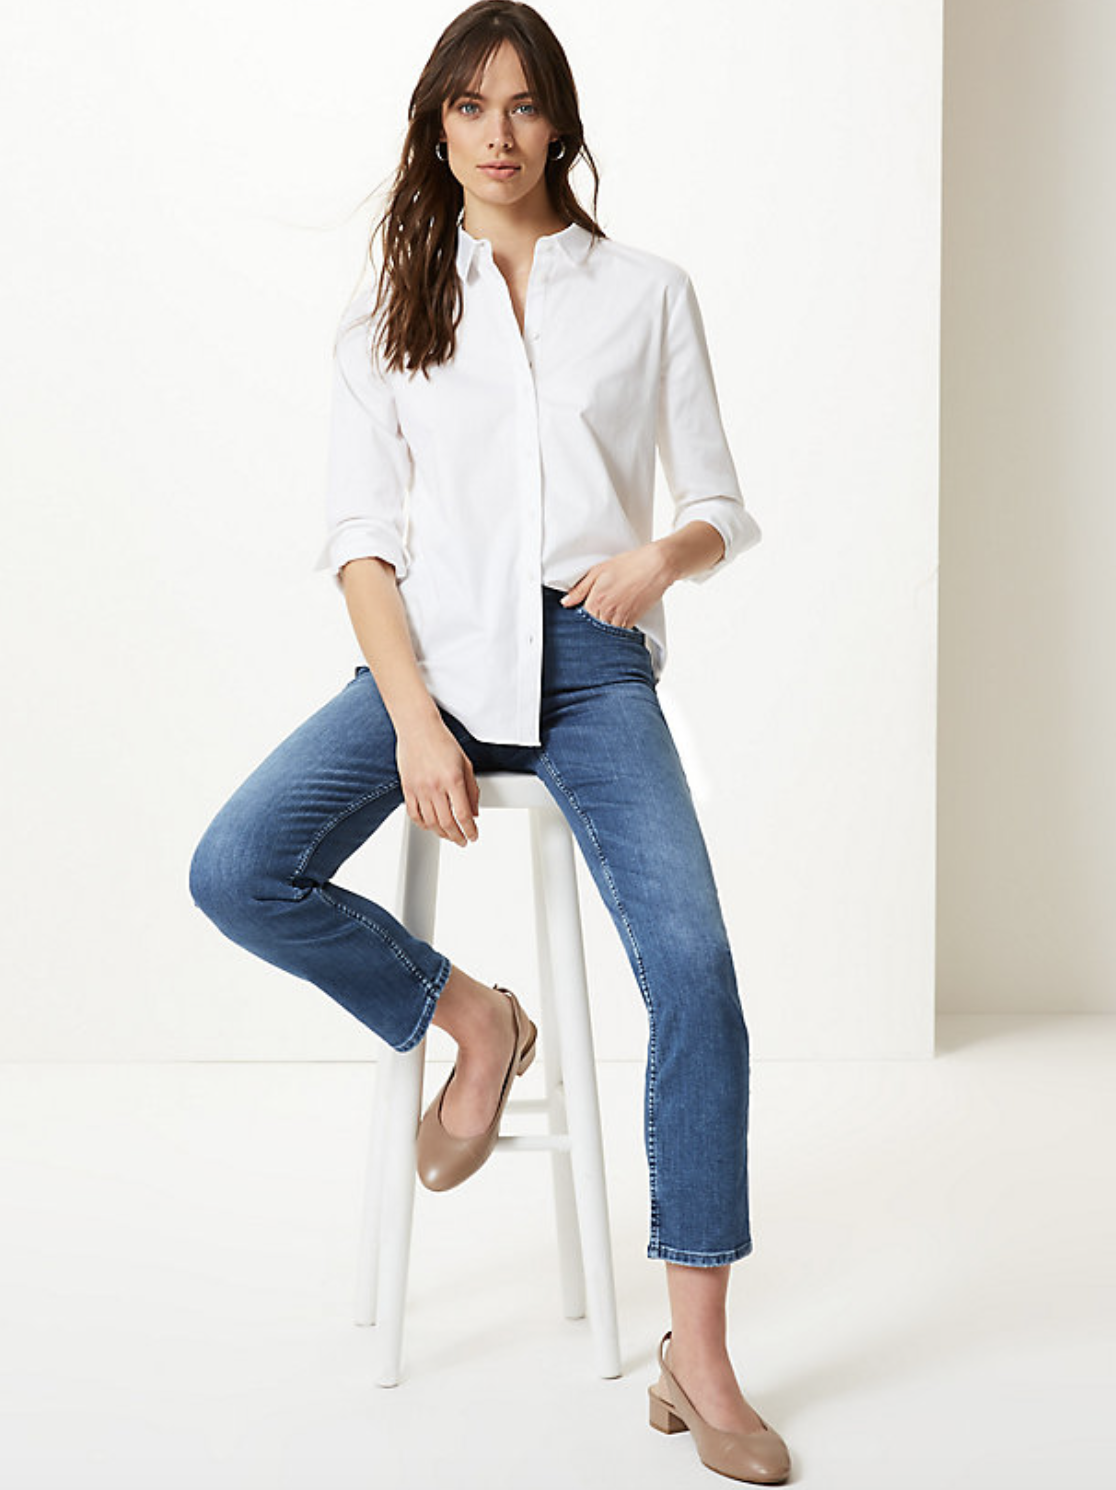 marks and spencer ladies jeans